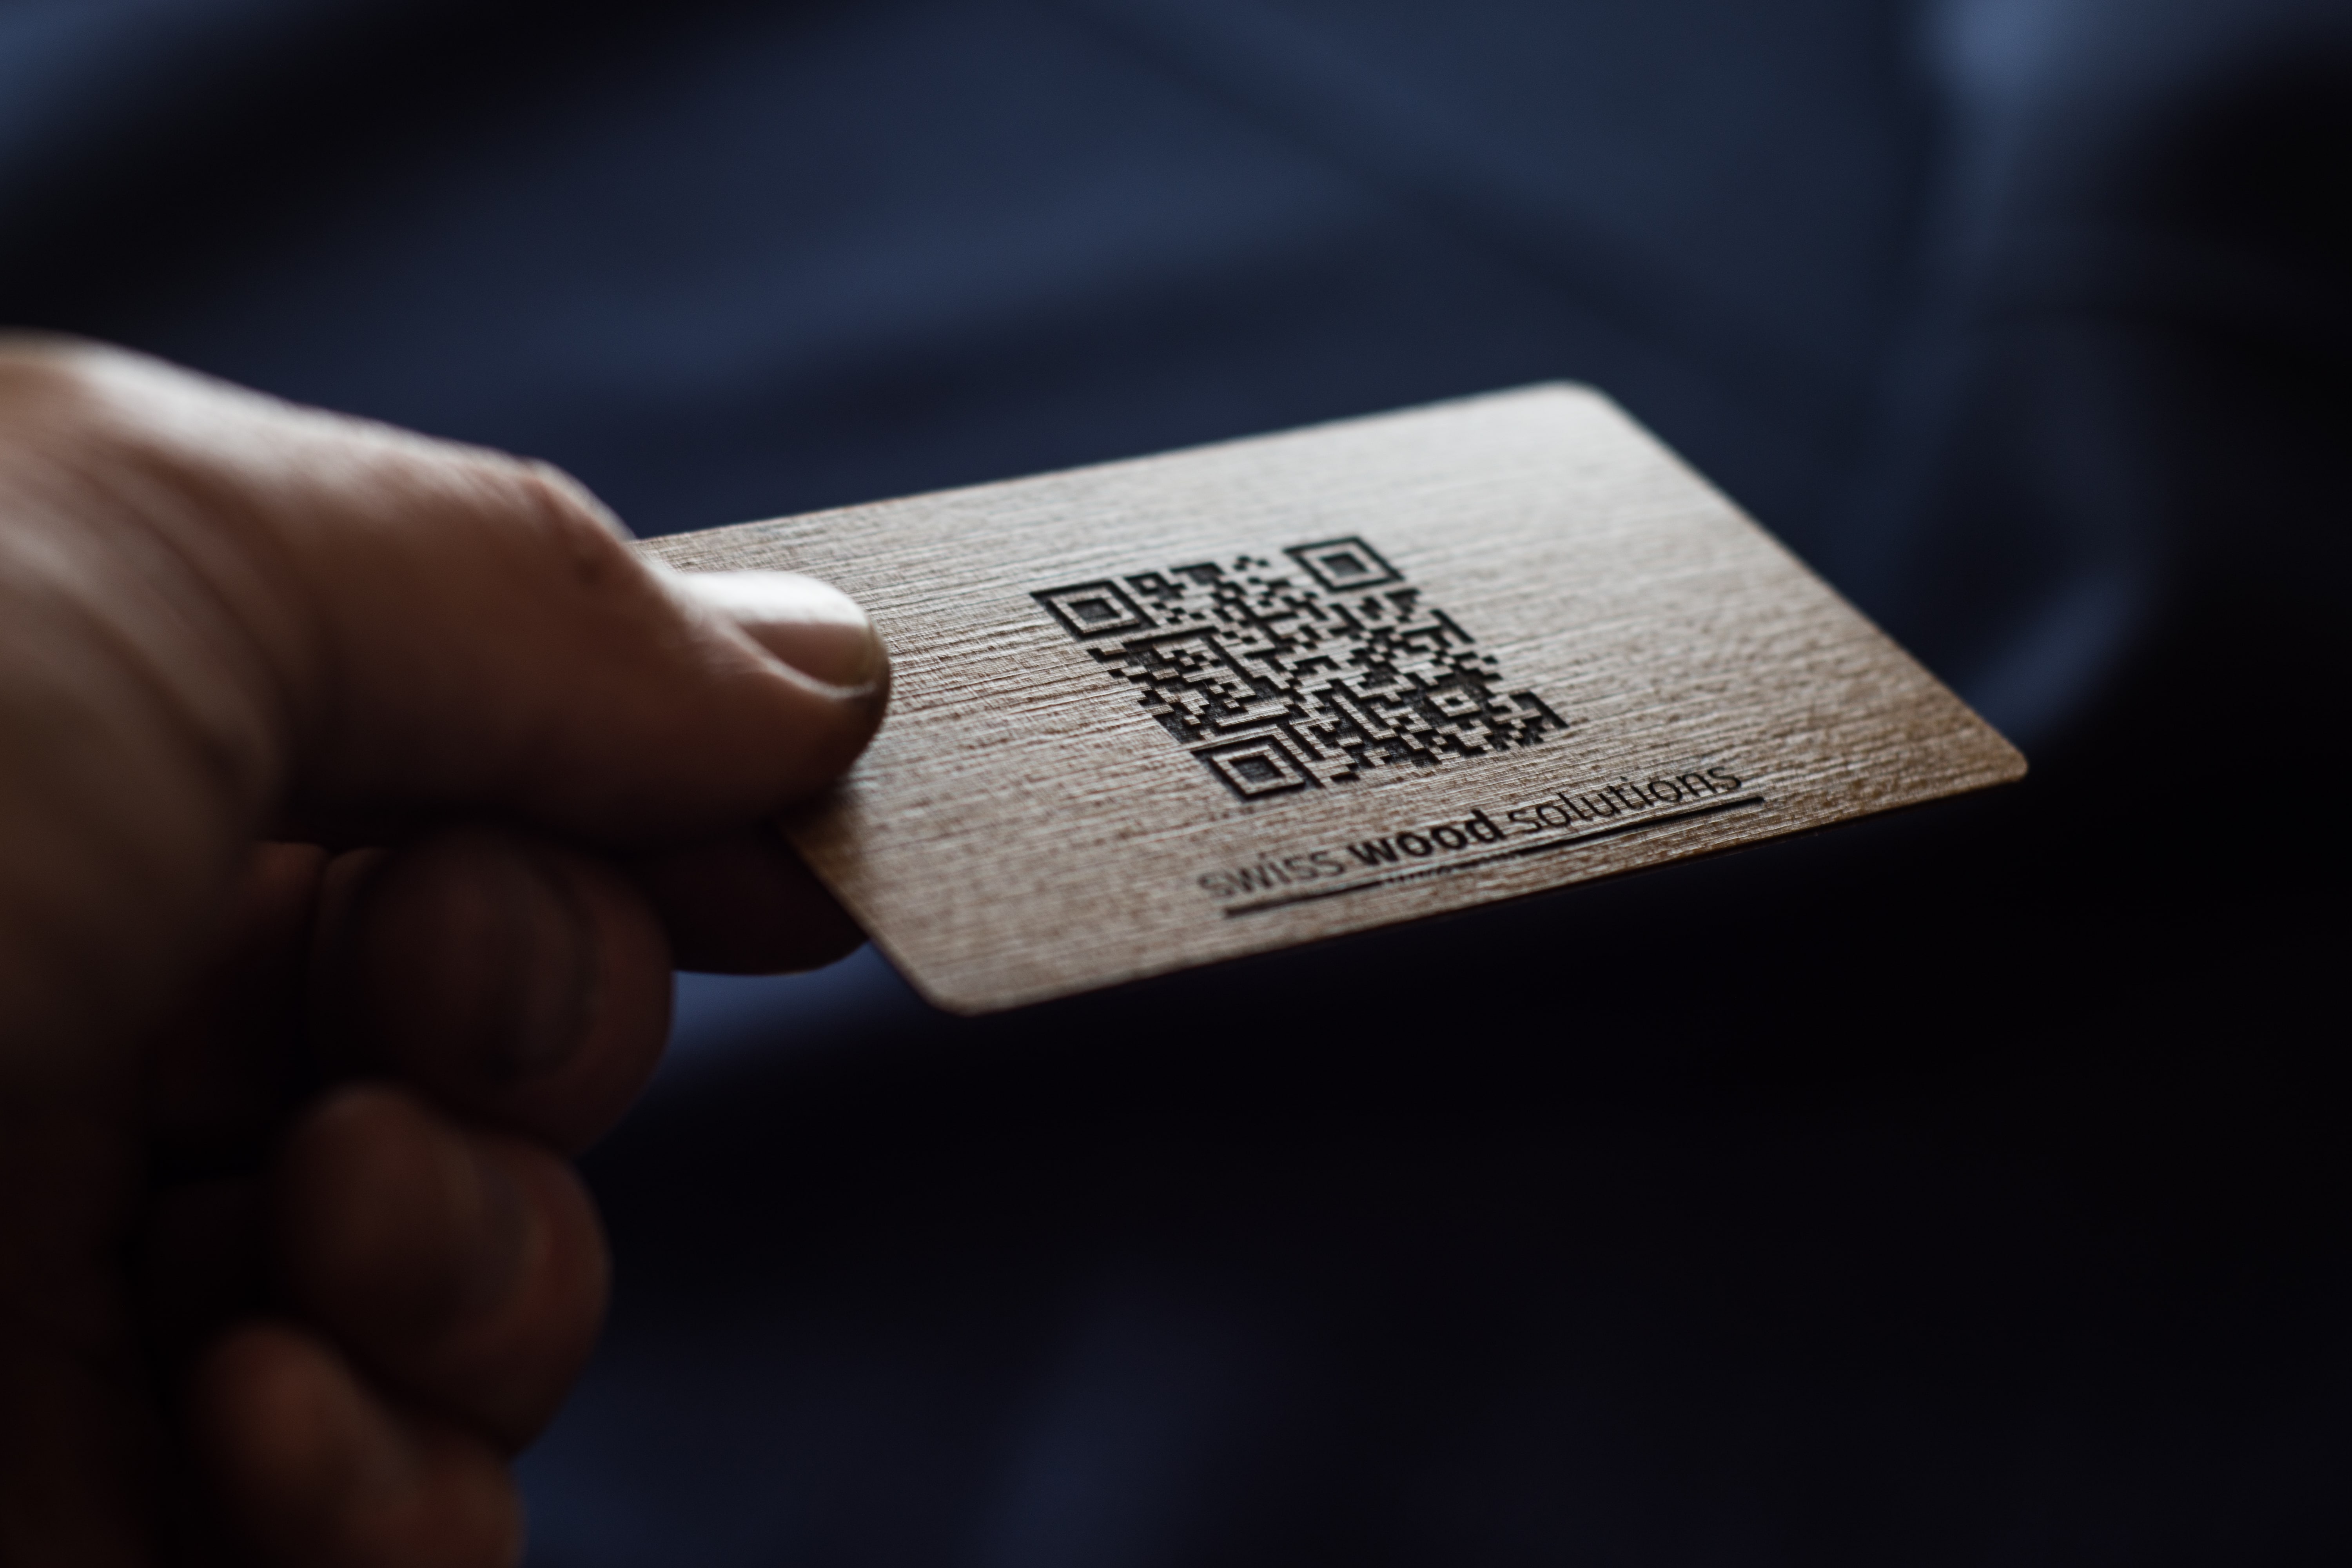 Swiss Wood Solutions business card with QR code from maple wood